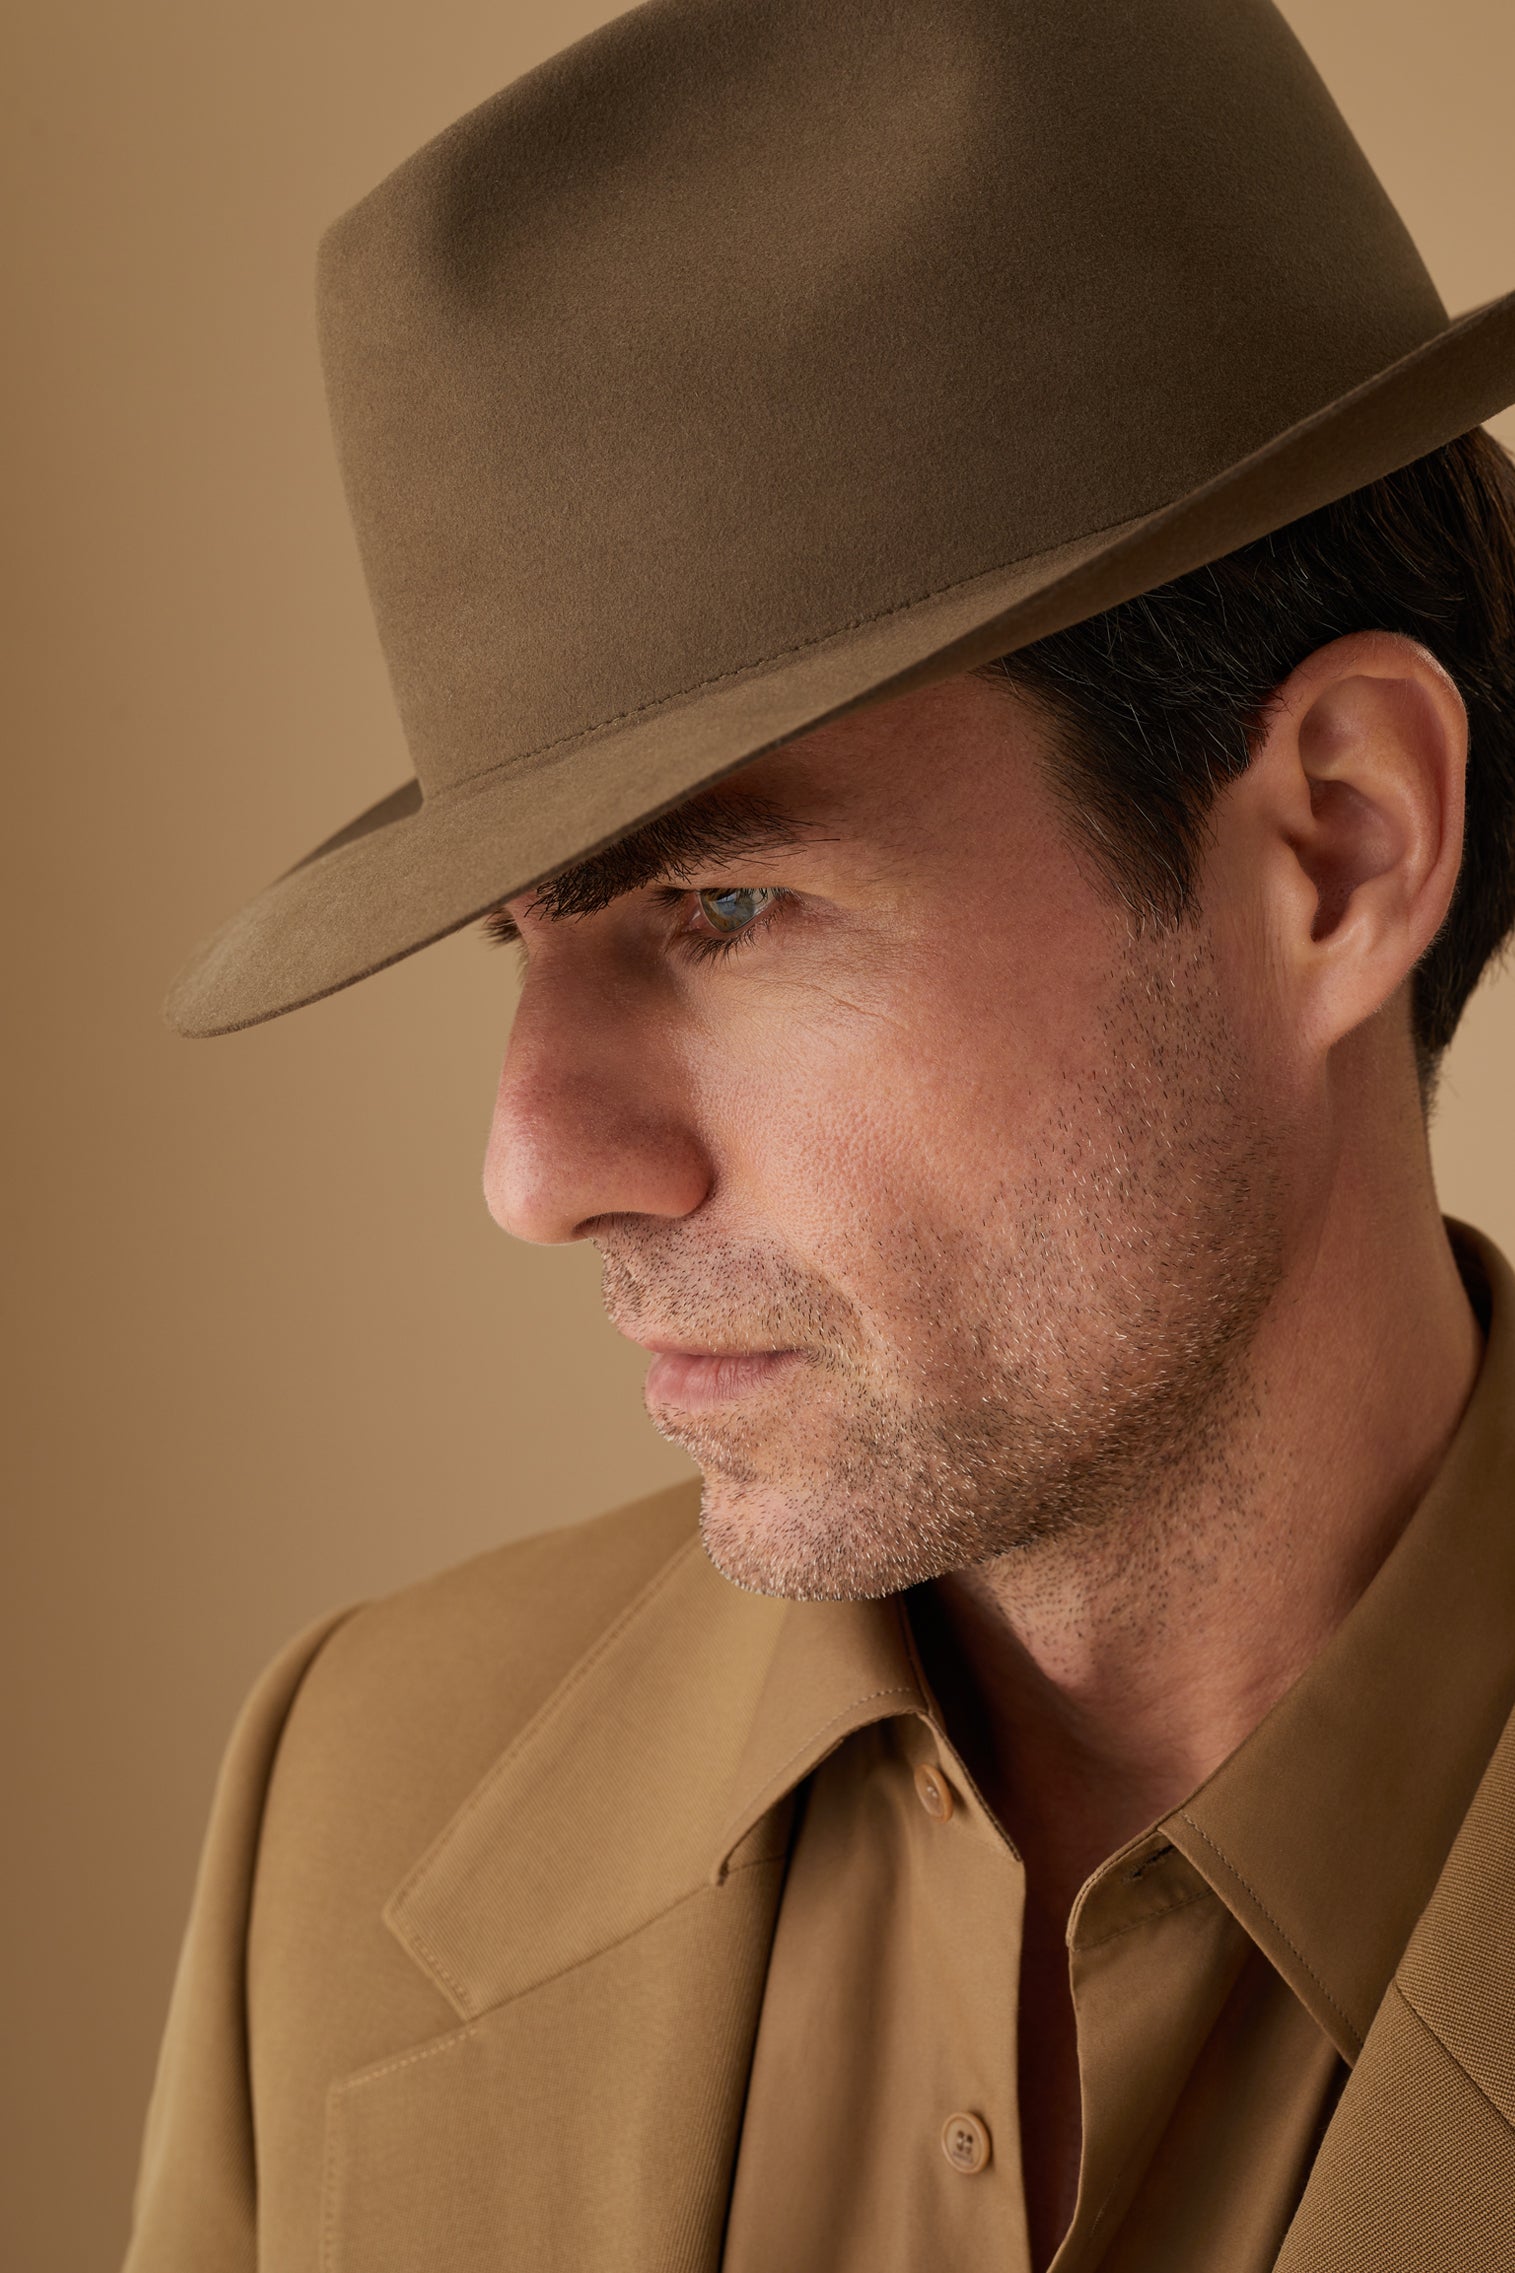 Vernon Olive Trilby - New Season Hat Collection - Lock & Co. Hatters London UK